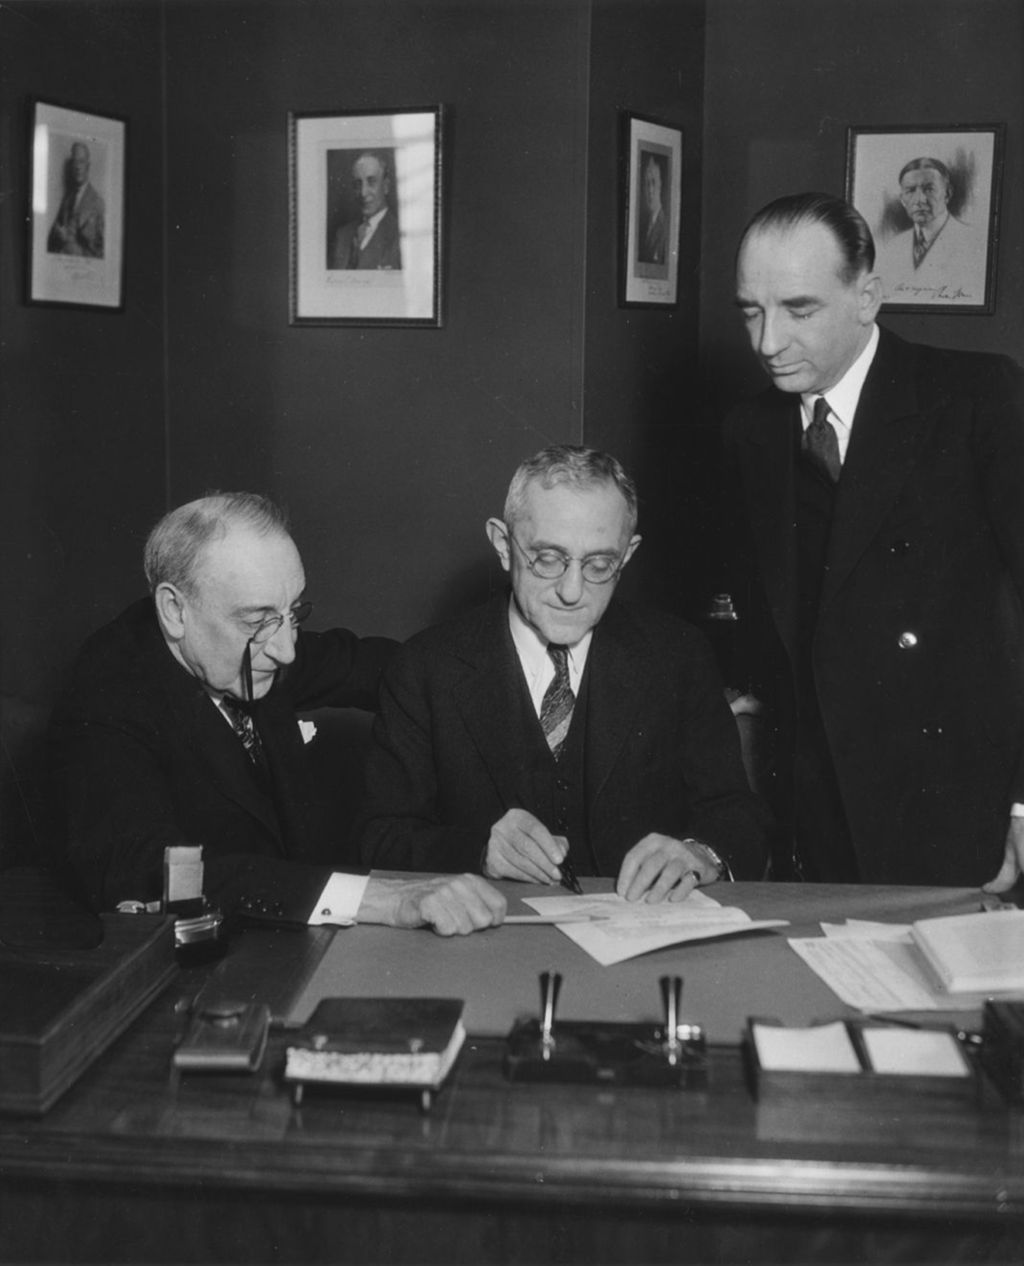 Edward H. Sniffen, Asst. Vice-President of Westinghouse Electric and Manufacturing Company, signing contract for renewal of the company's exhibit